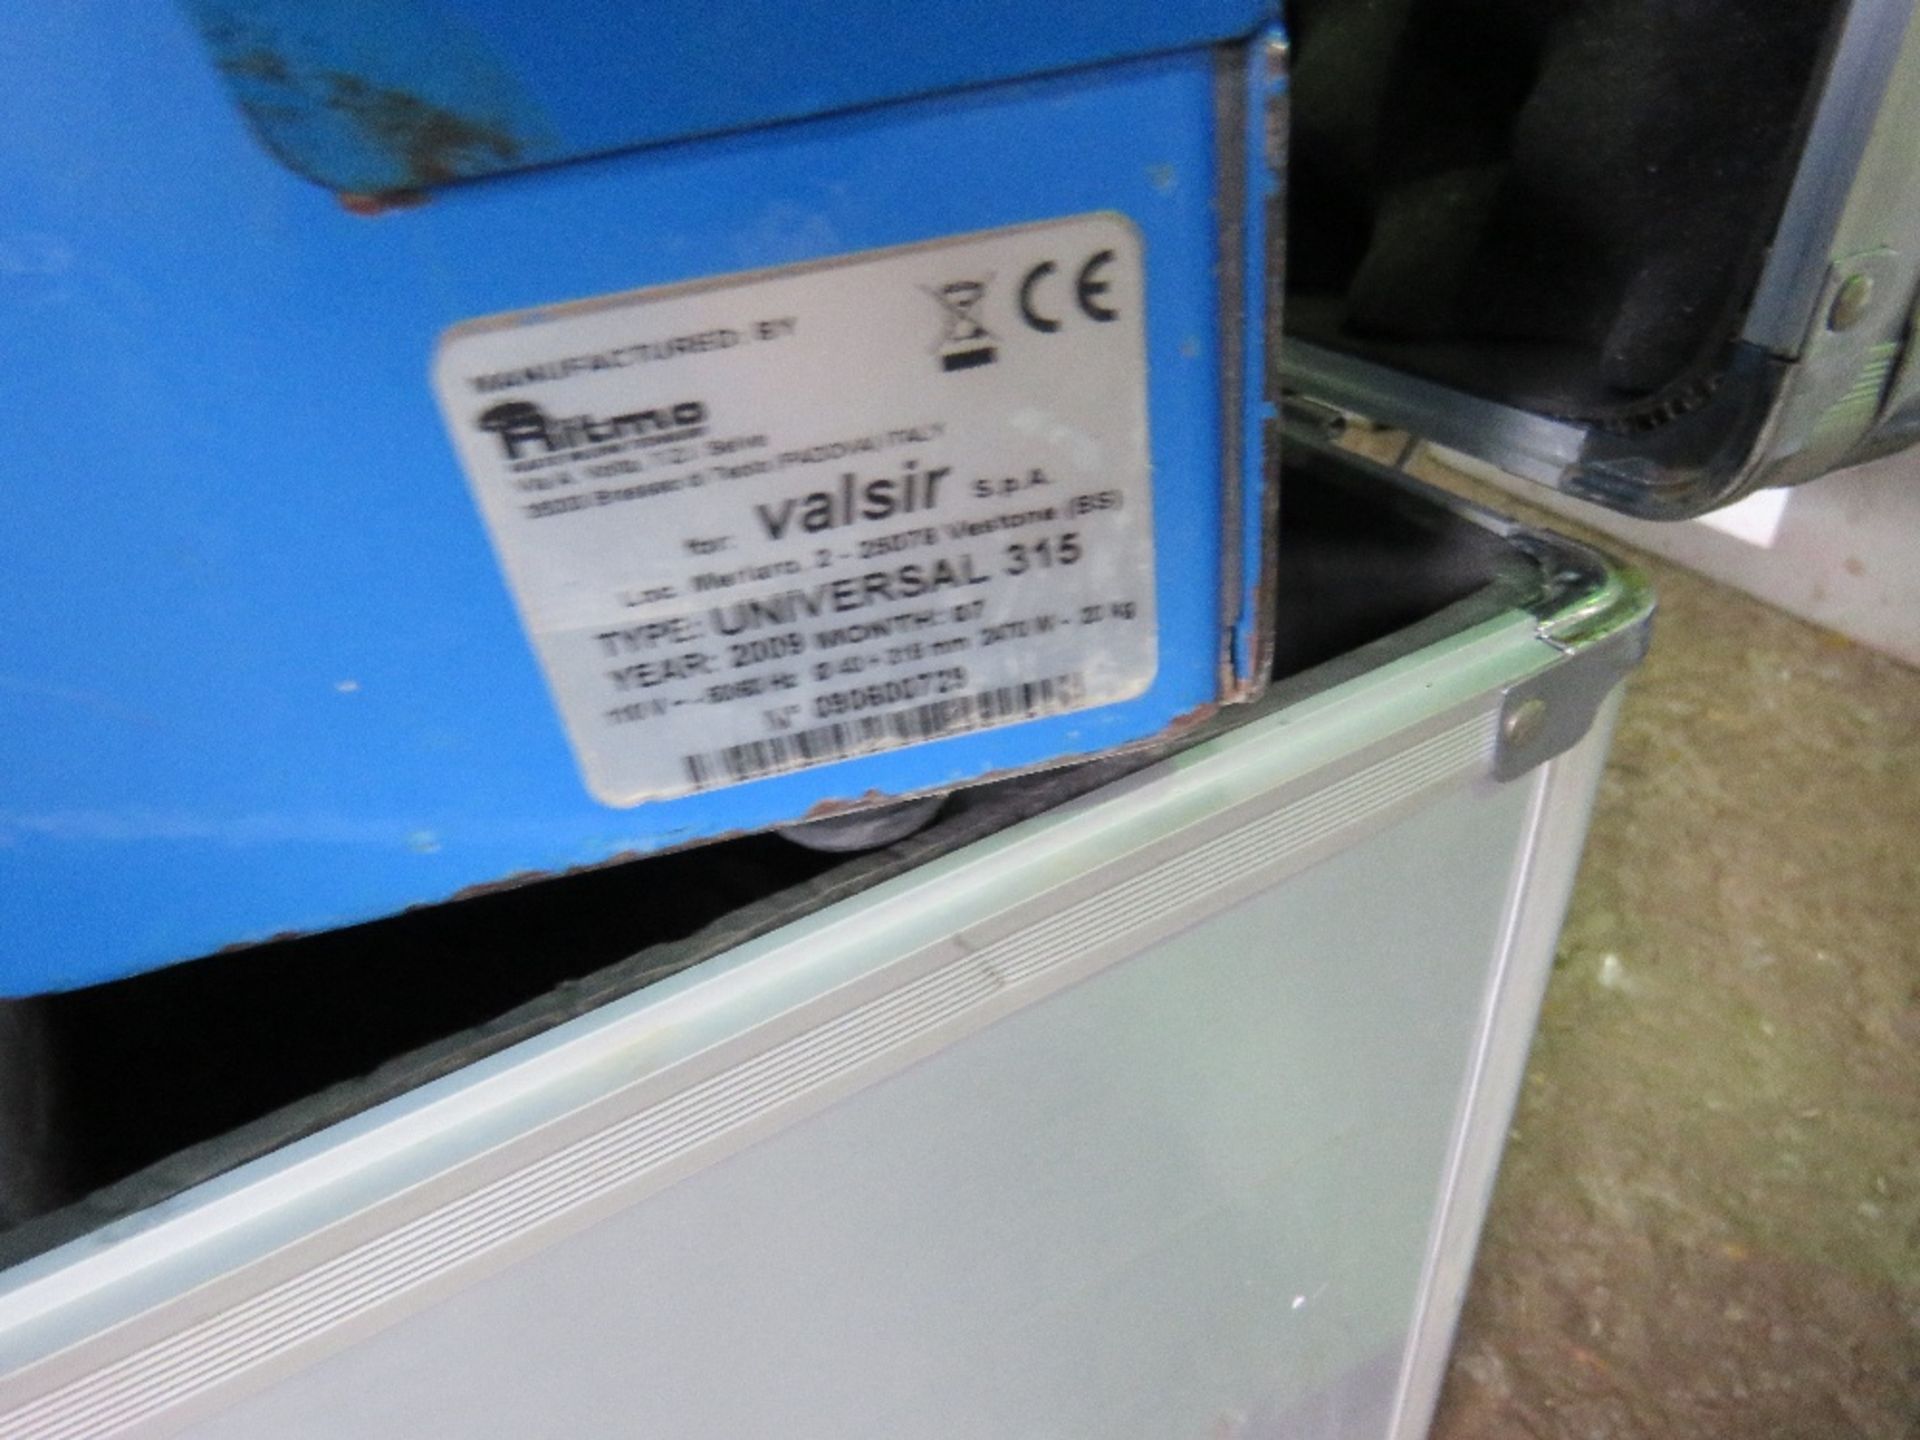 1 X UNIVERSAL S-315 110VOLT 2470W DRAINAGE PIPE FUSION WELDER UNIT. IN CASE WITH CABLES ETC. - Image 4 of 4